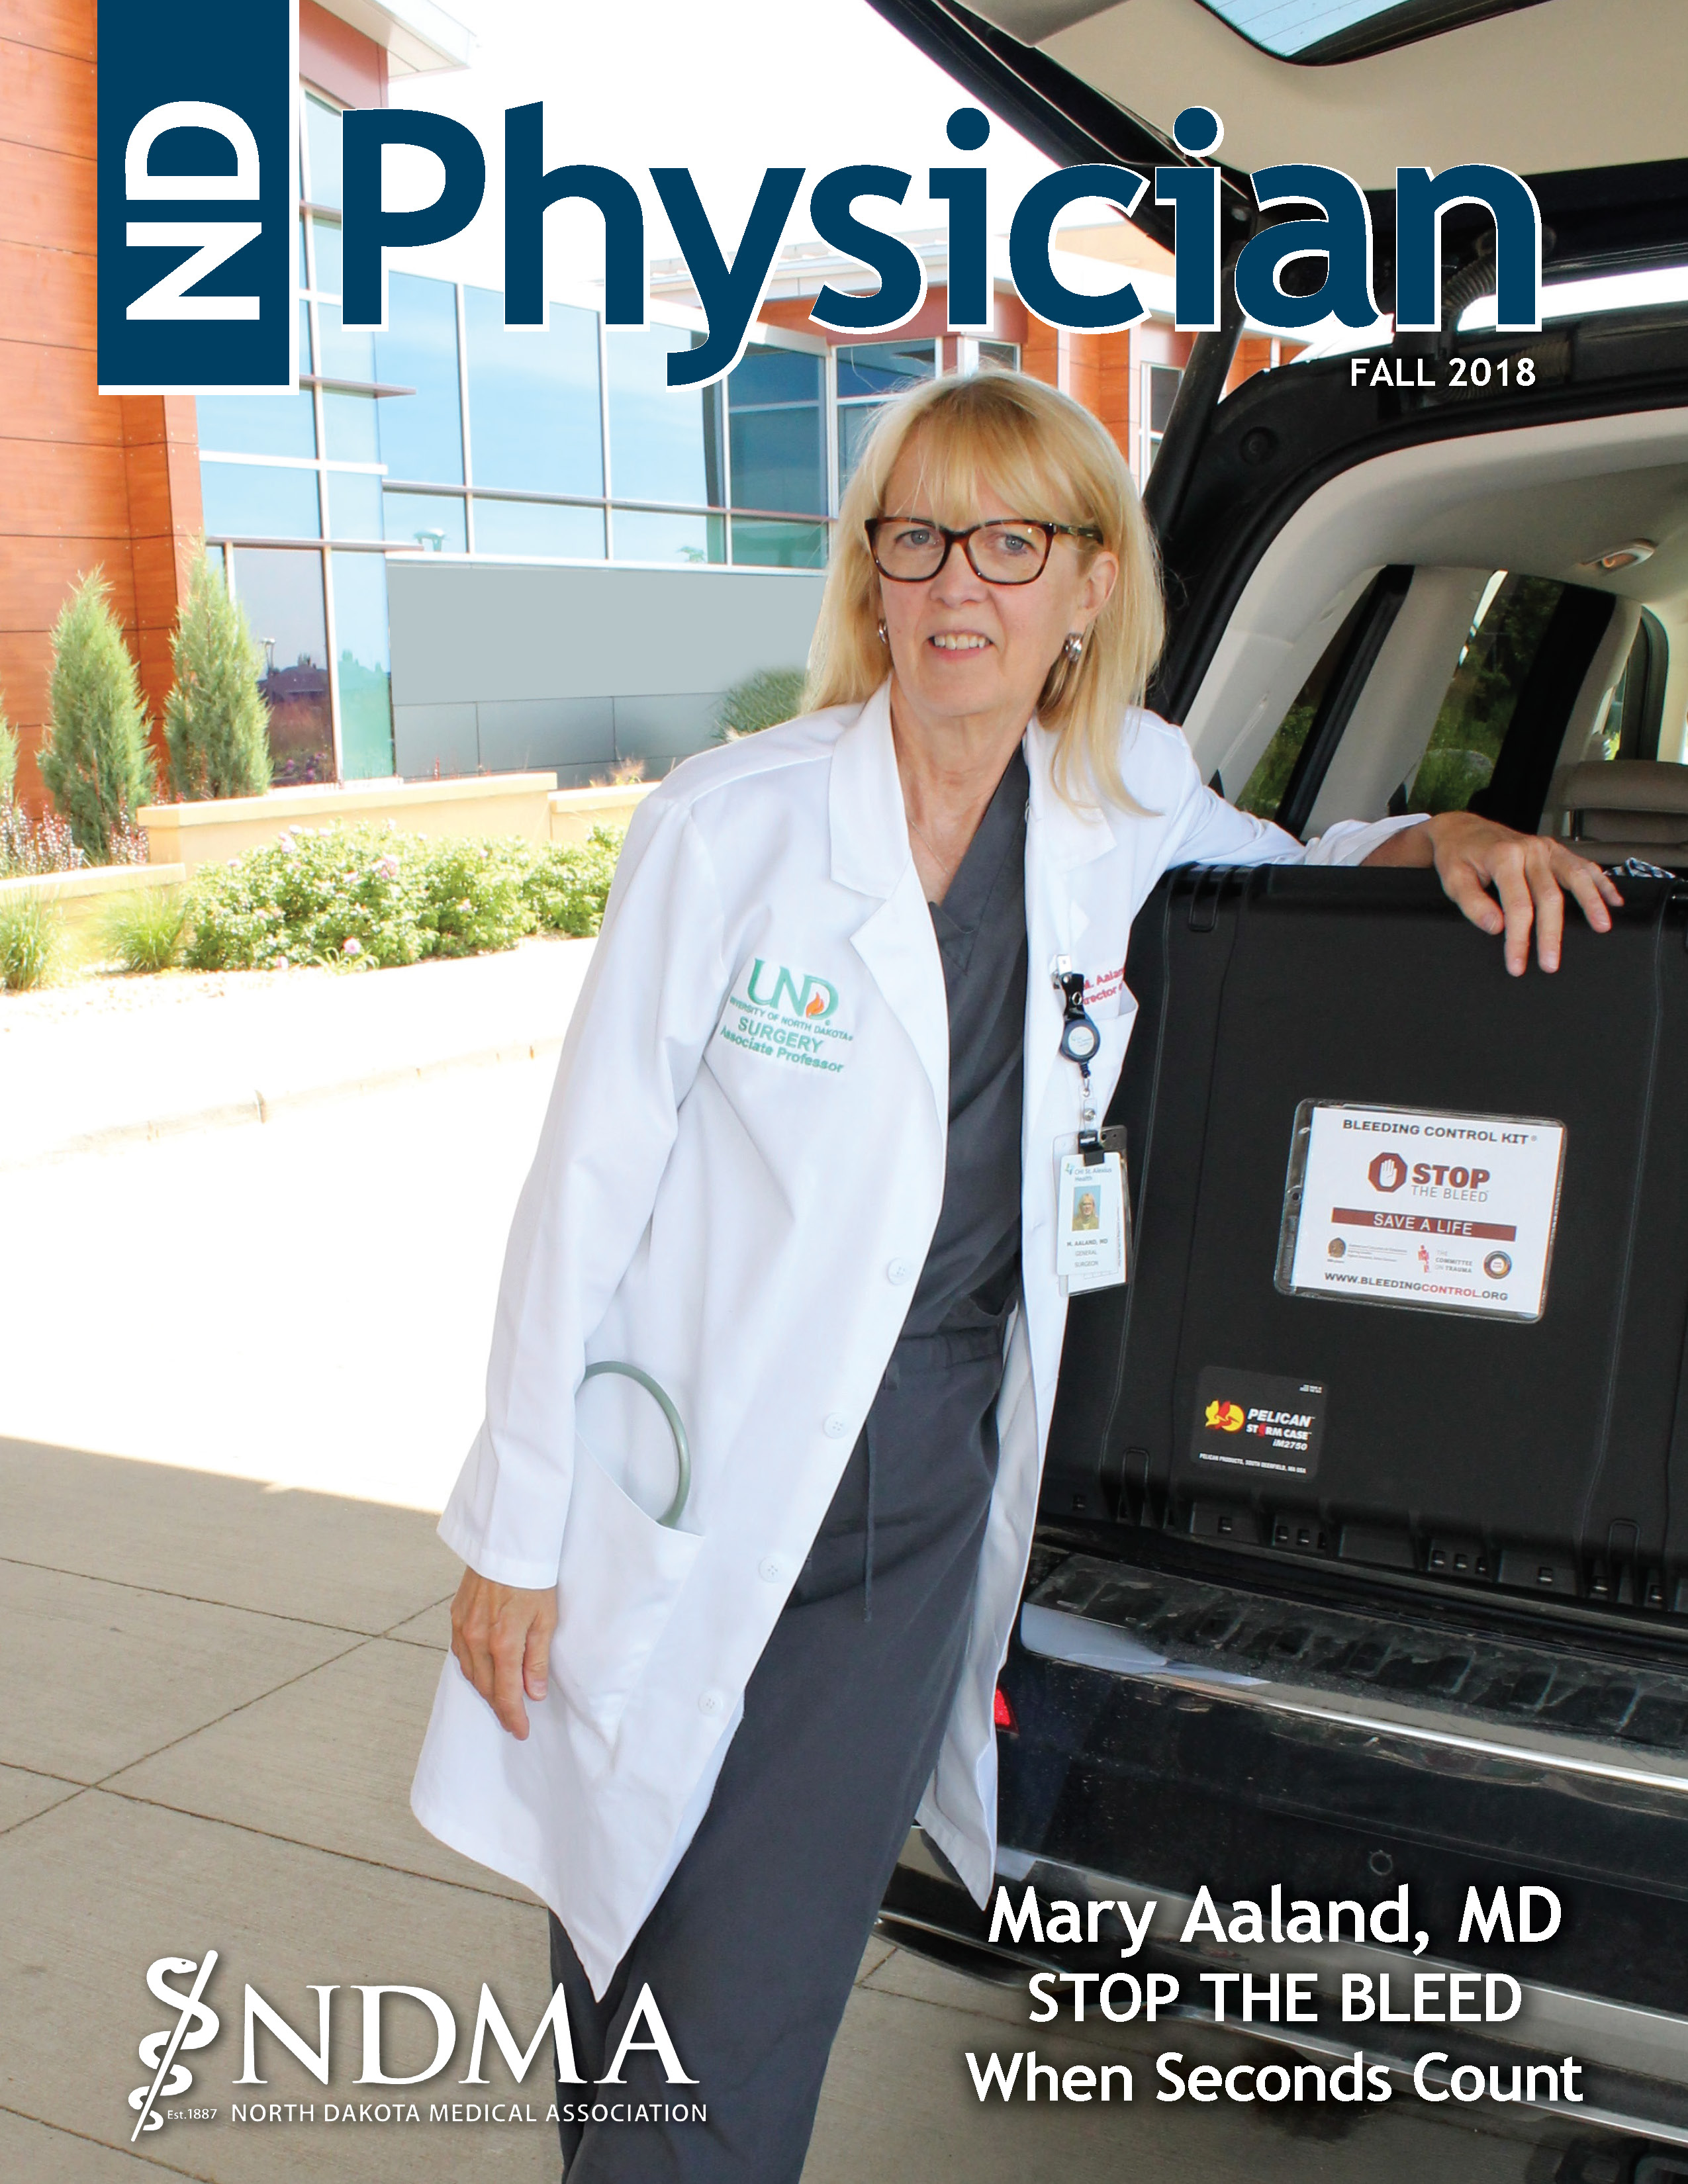 ND Physician Fall 2018 magazine cover